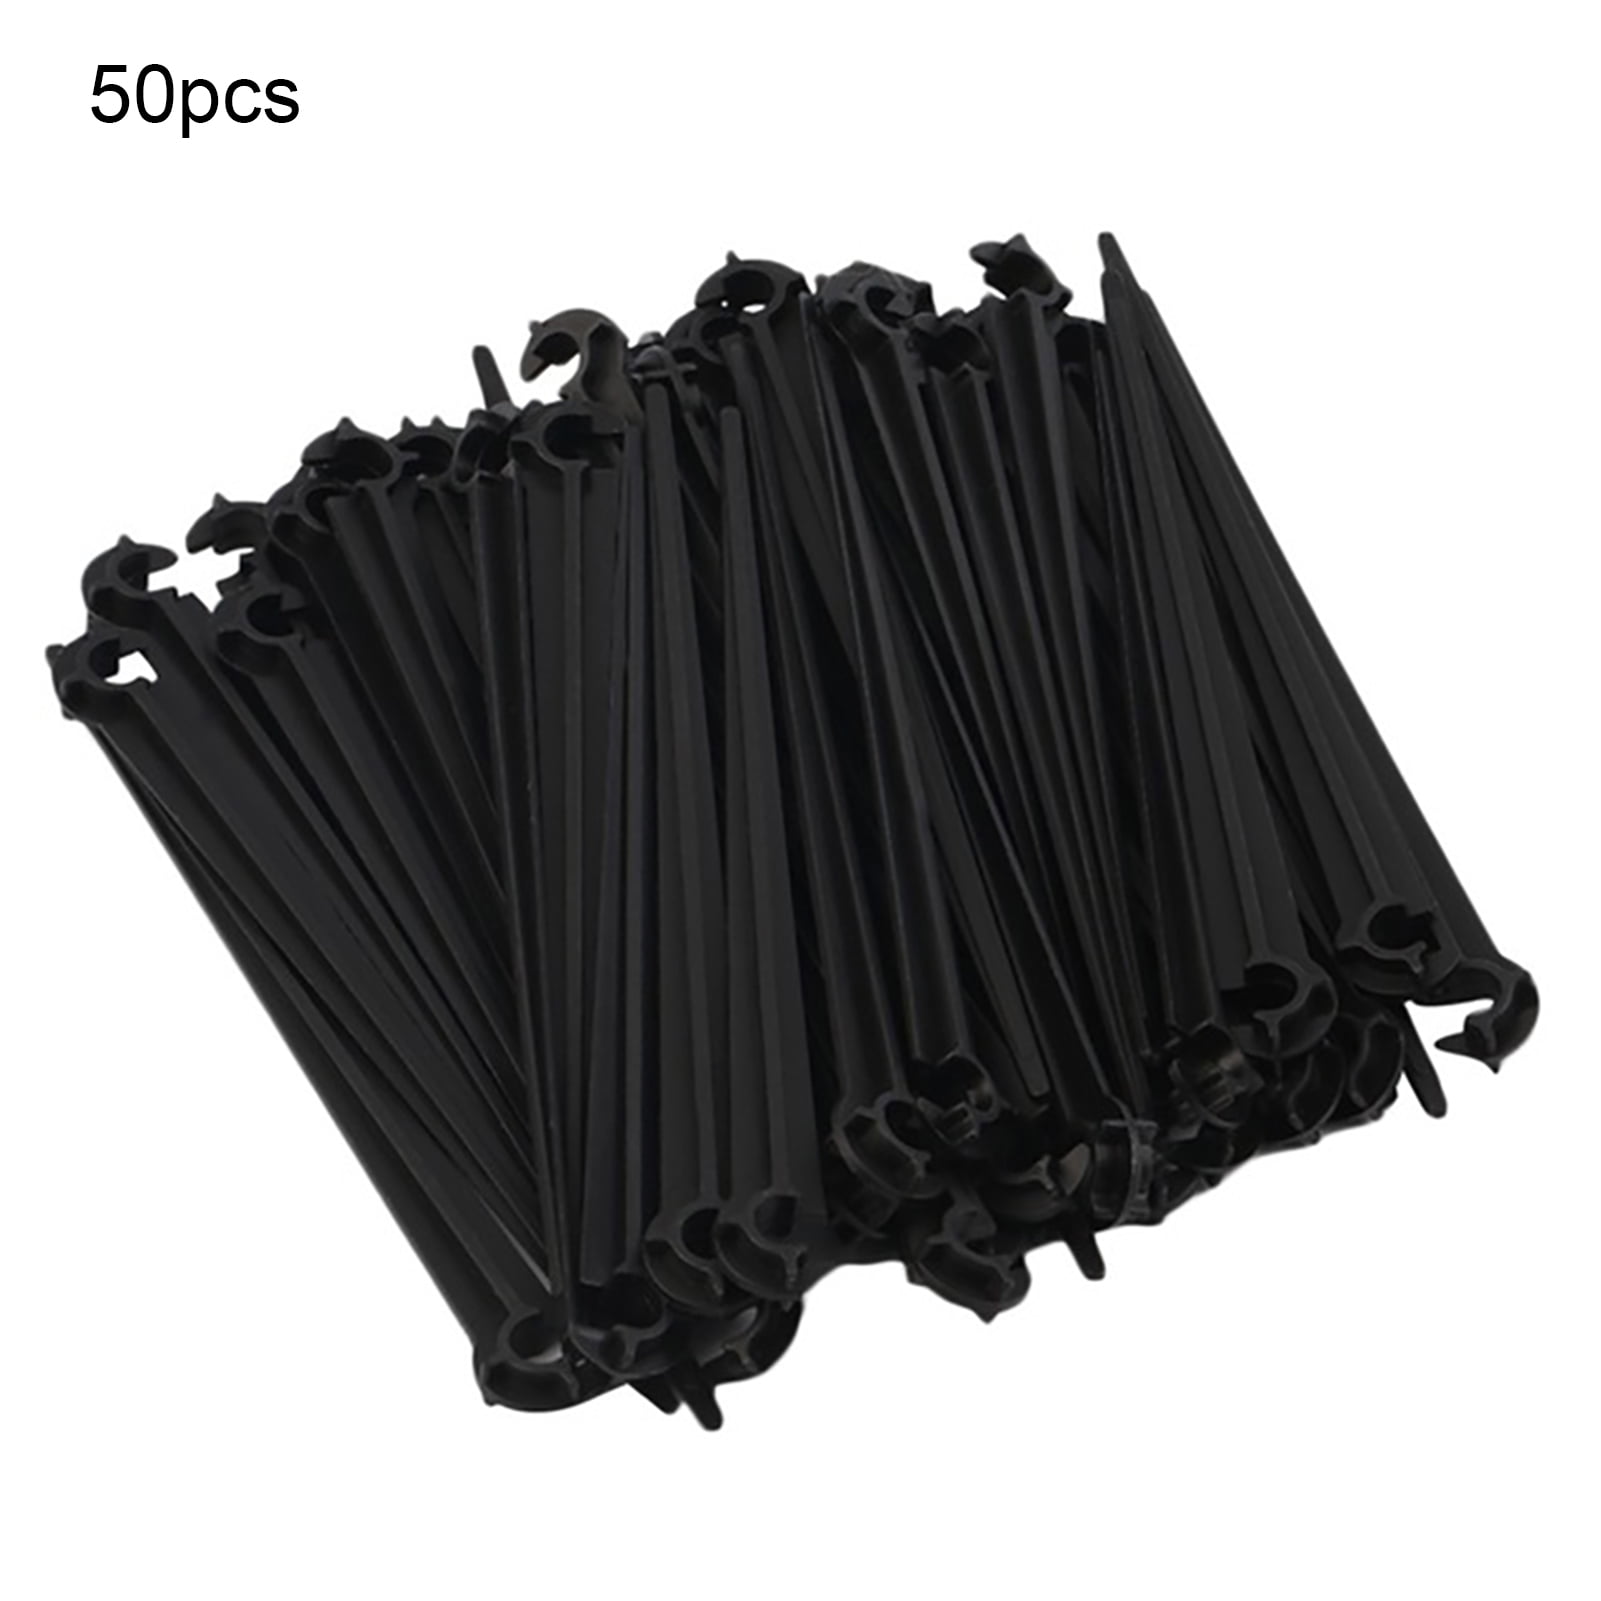 50pcs Garden 4/7mm Drip Irrigation Hose Tube Pipe Support Bracket Holders Fixed 